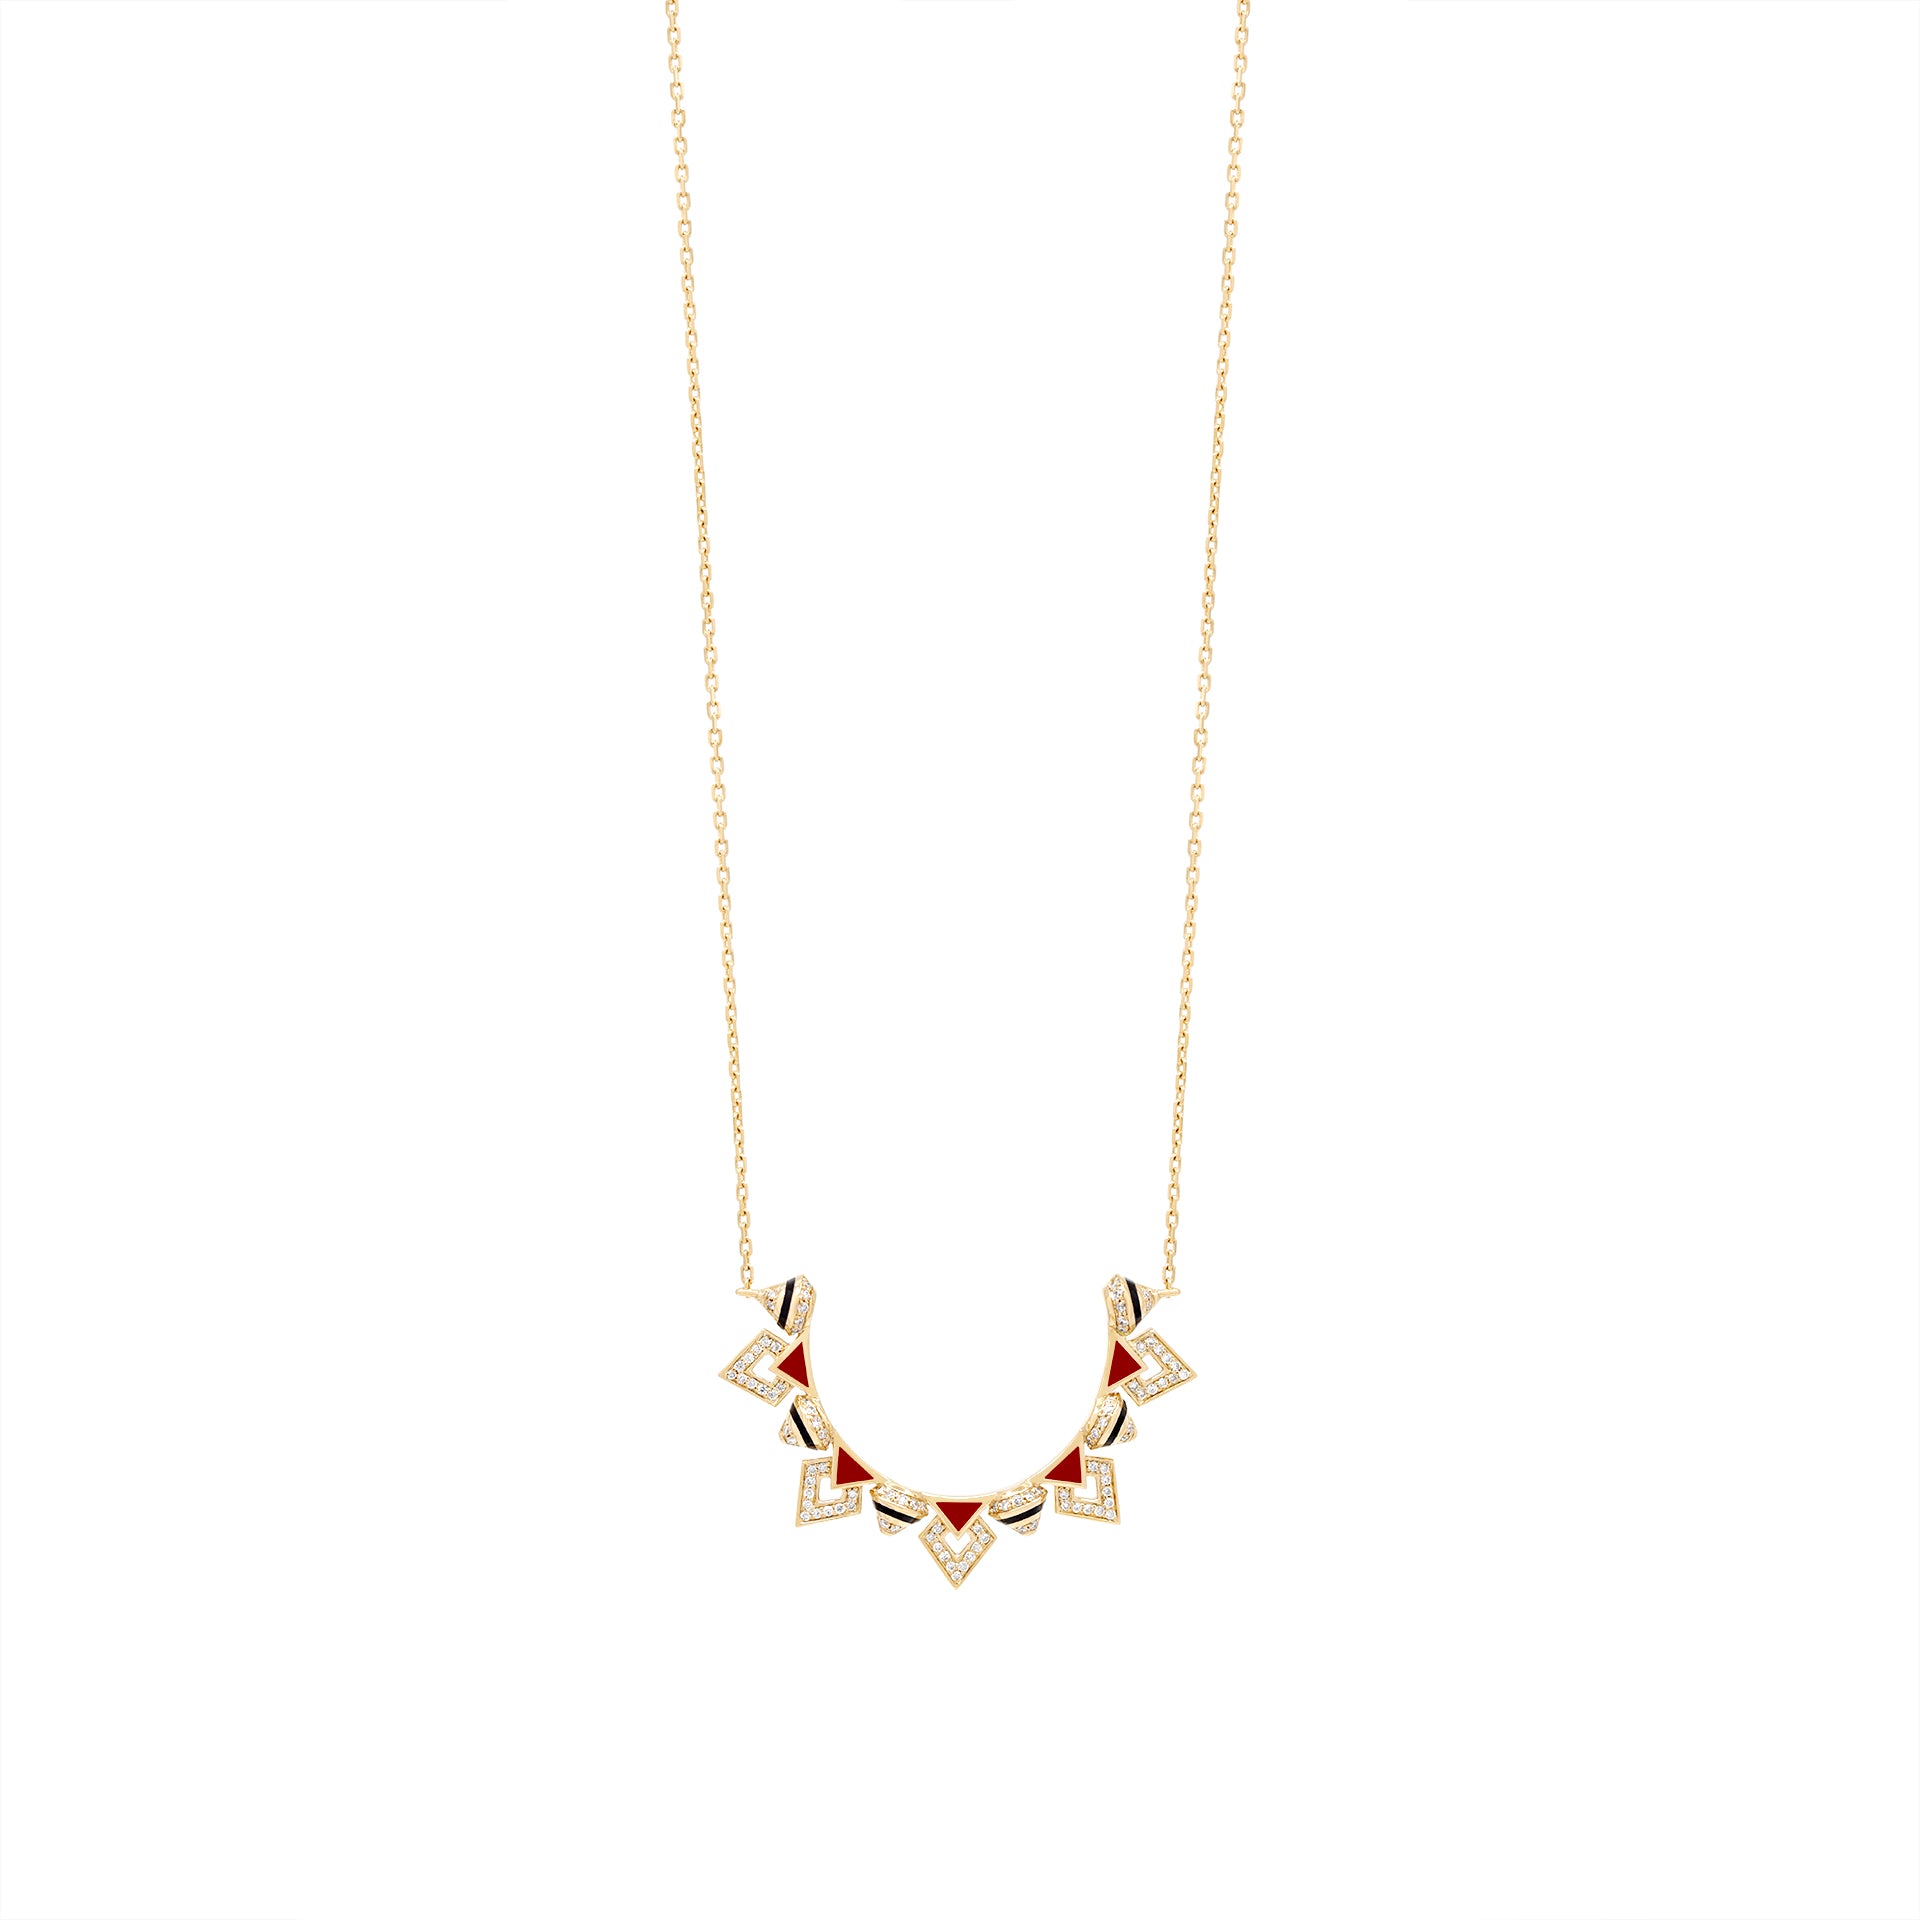 Mosaic Rouge Pendant Necklace in 18K Yellow Gold And Diamonds